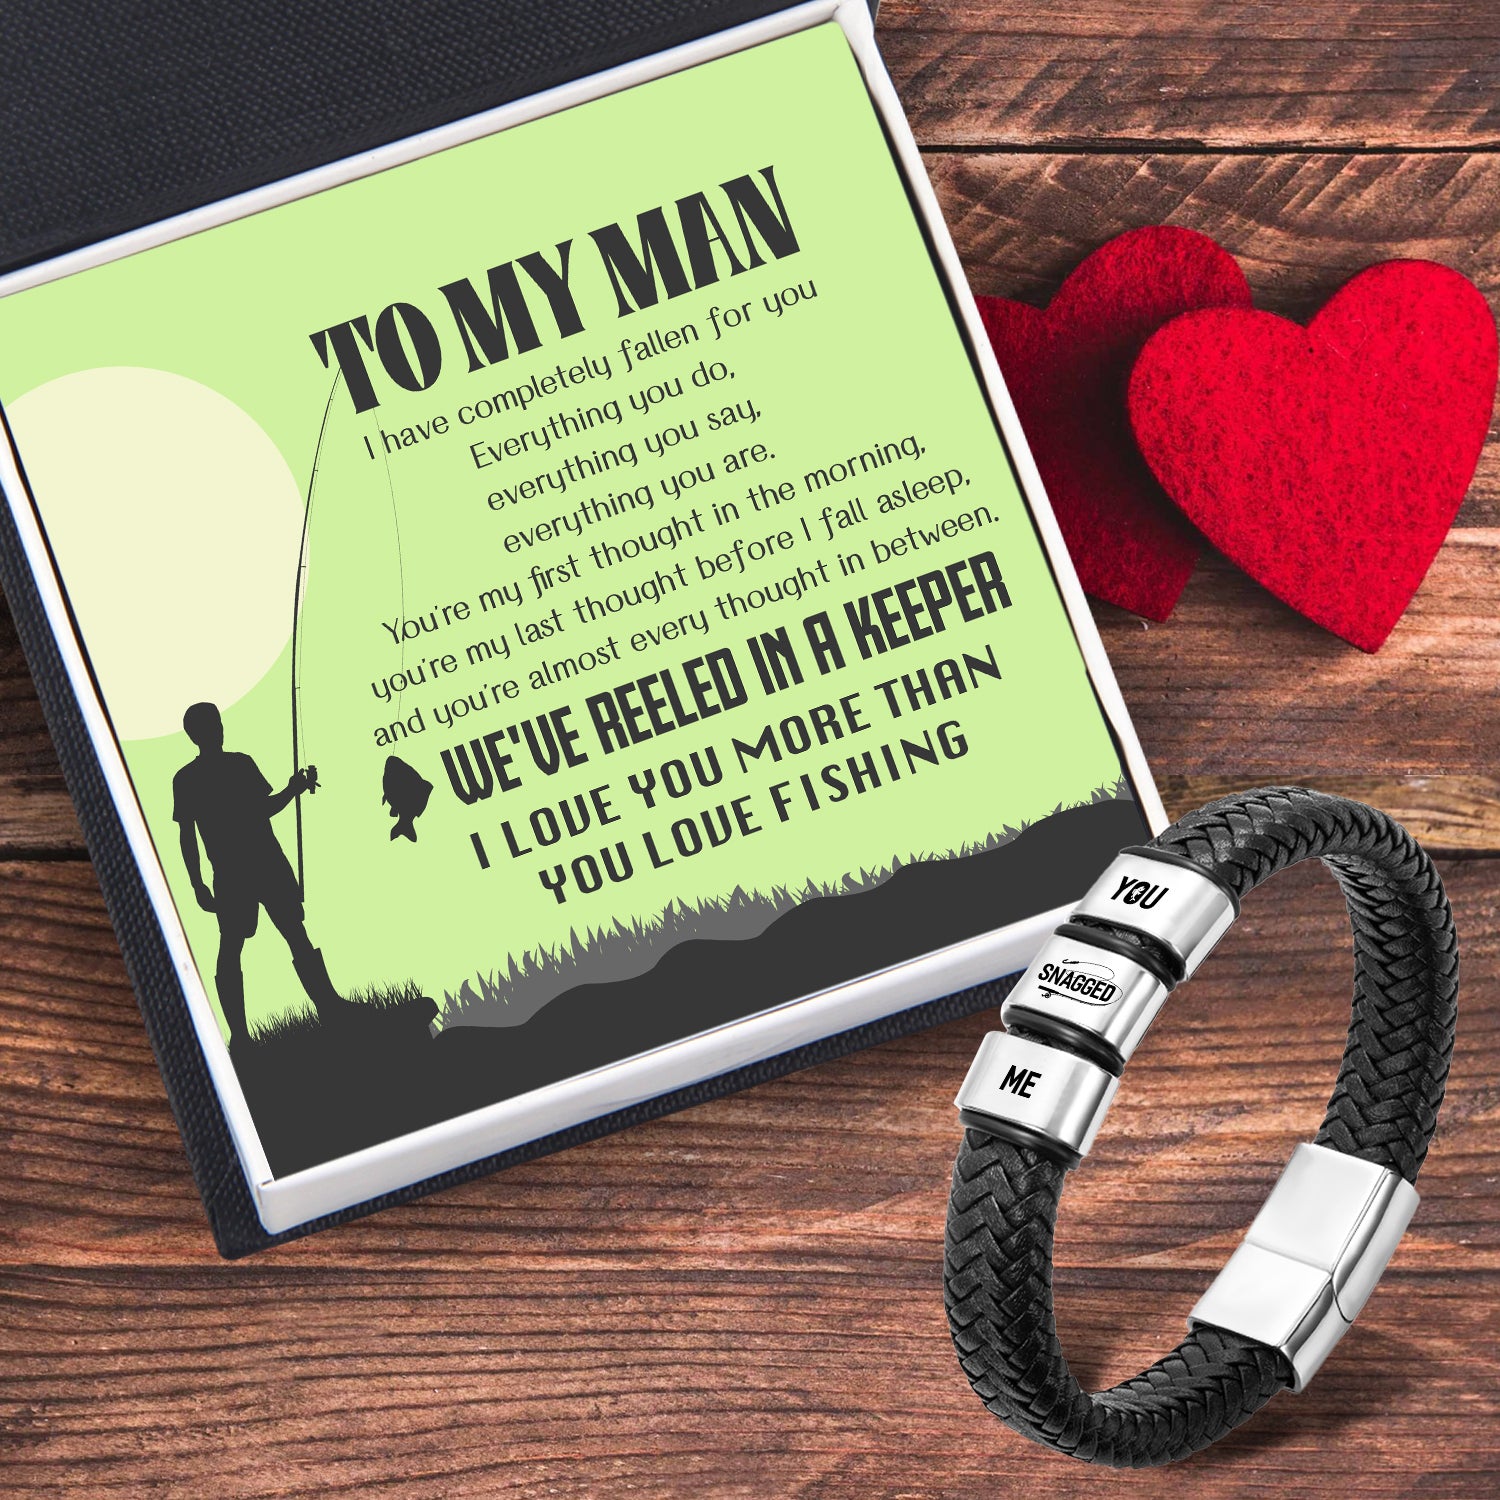 Leather Bracelet - Fishing - To My Man - I Love You More Than You Love Fishing - Ukgbzl26048